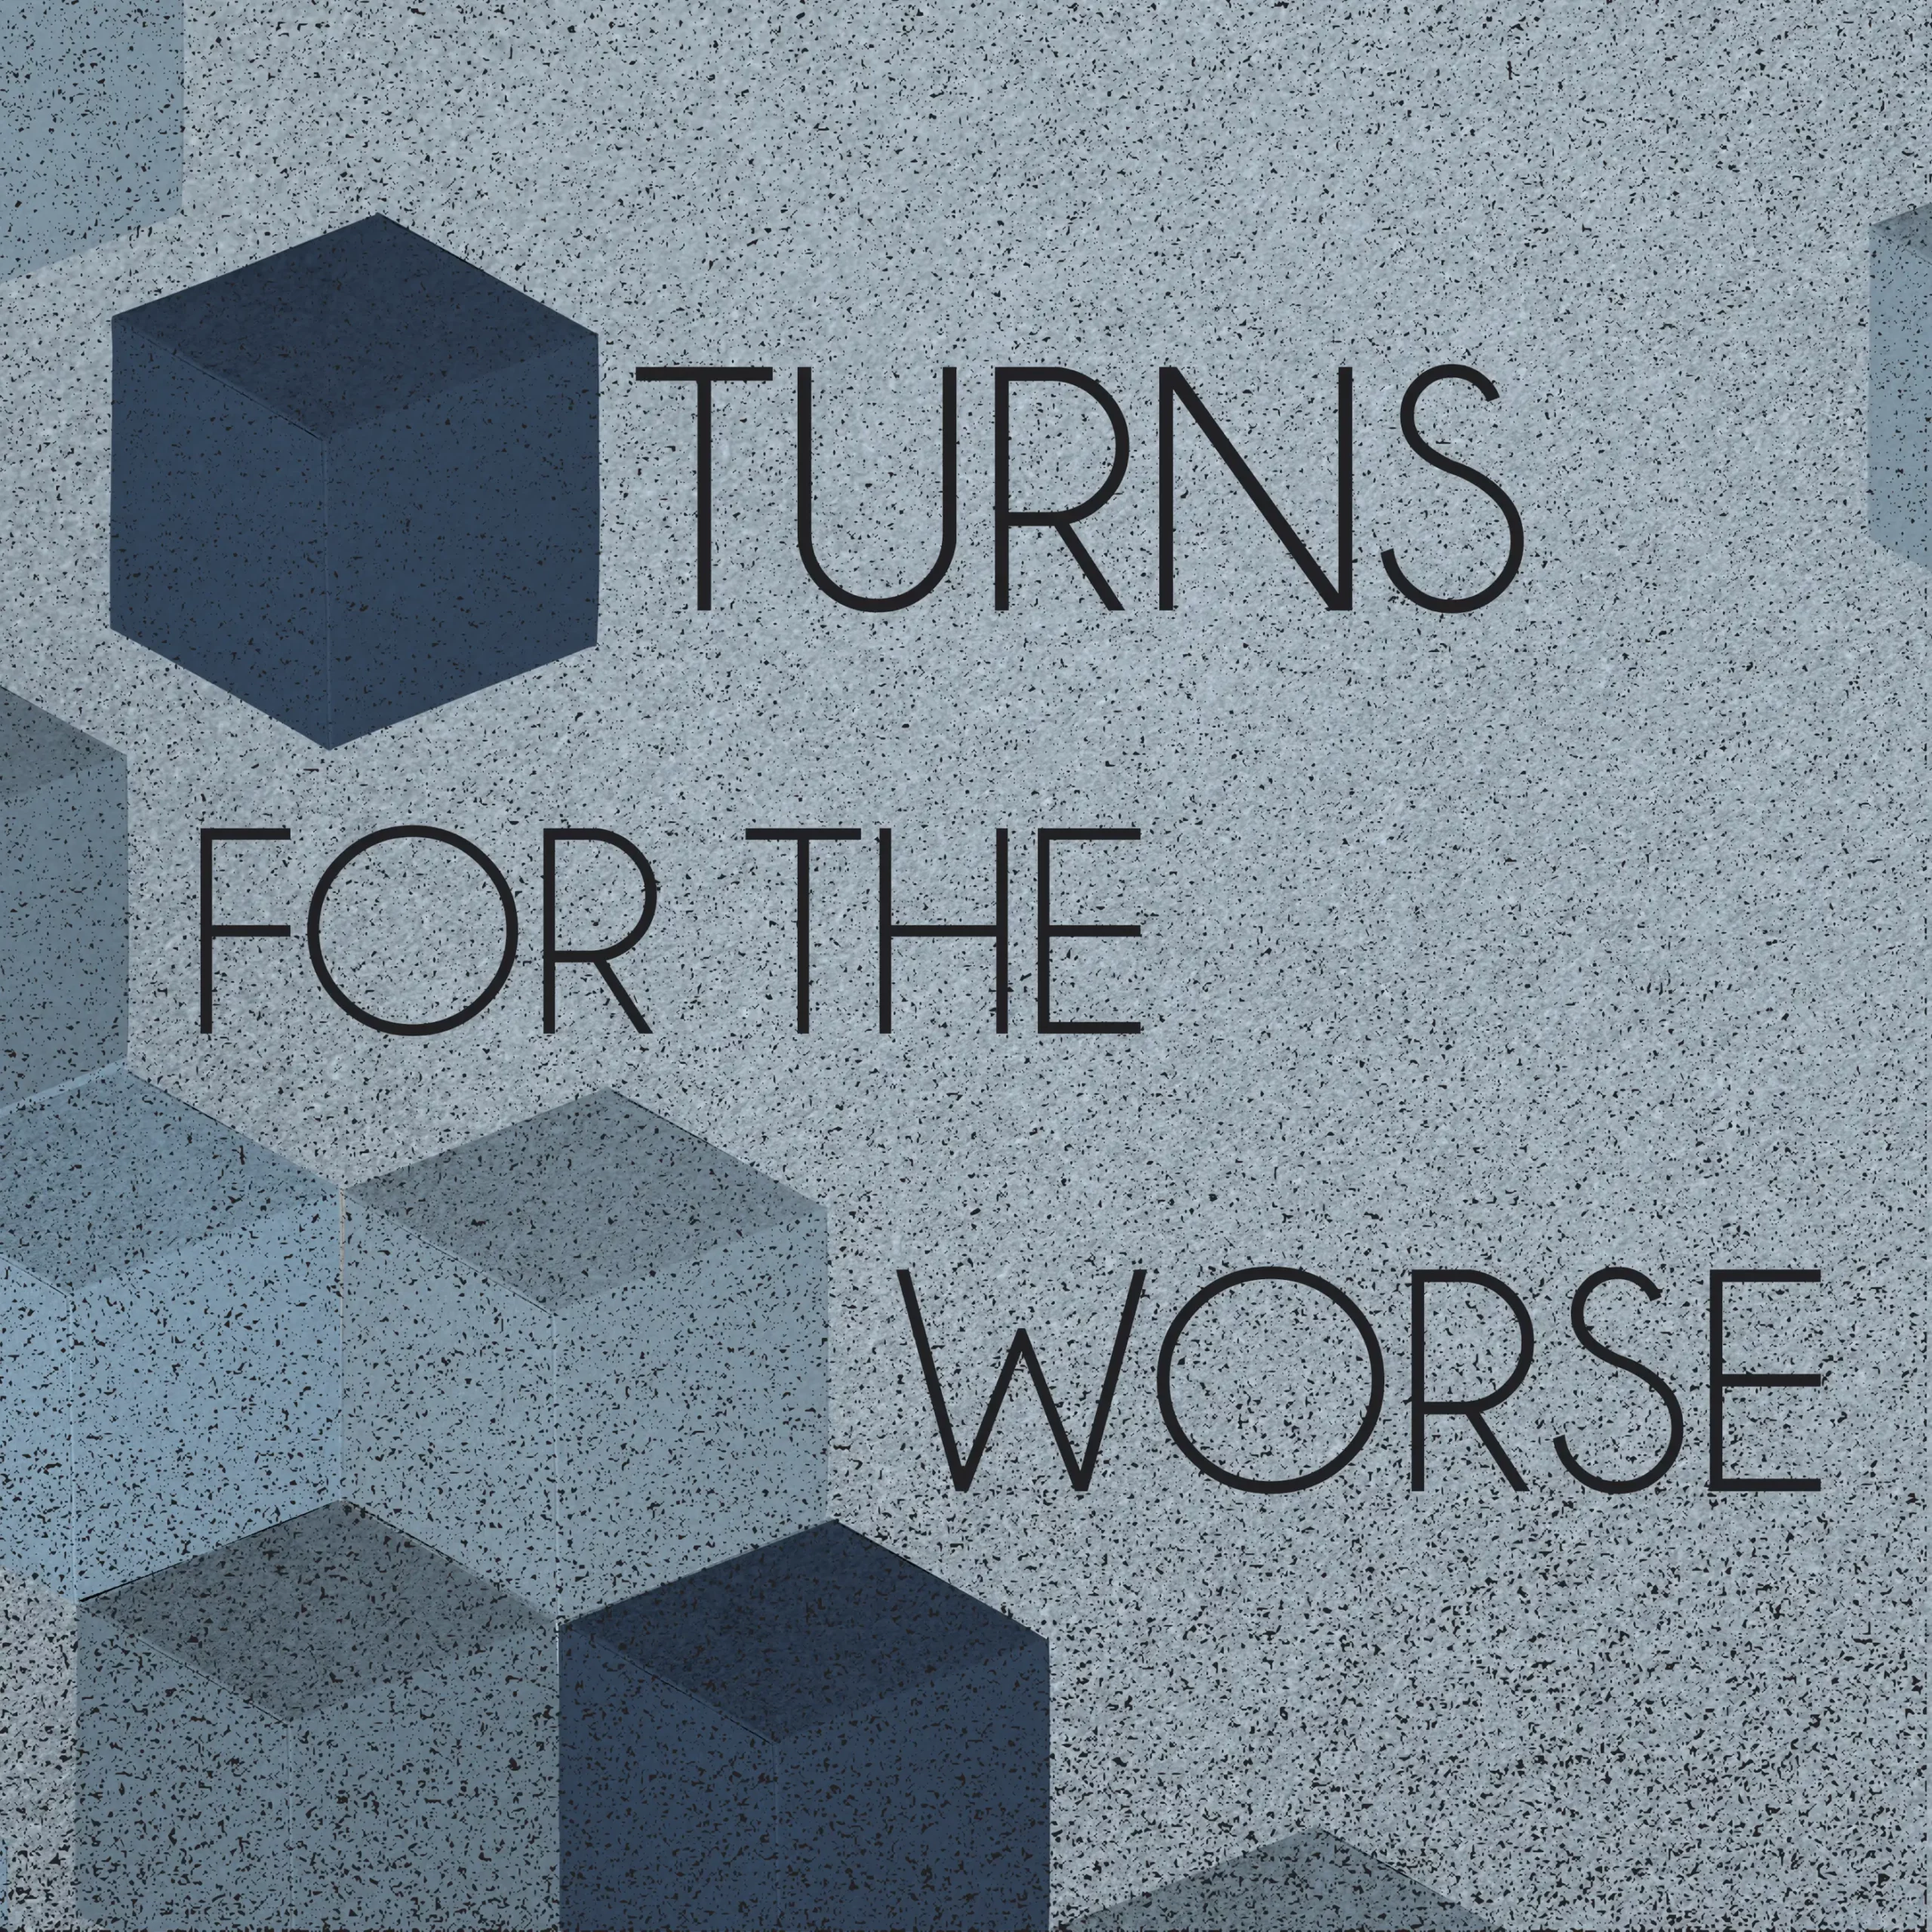 Album cover art for Turns for the Worse